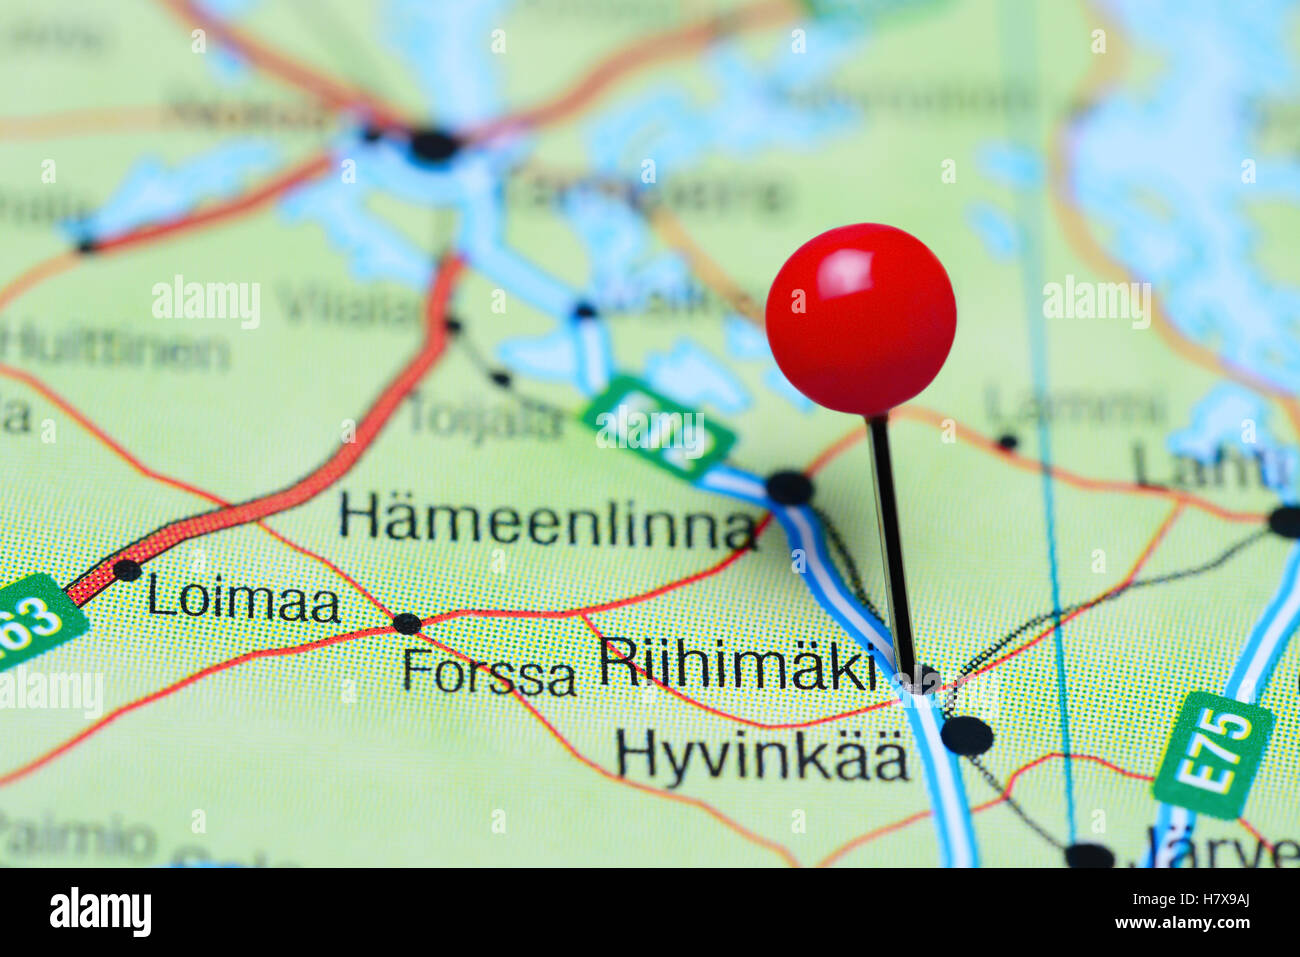 Riihimaki pinned on a map of Finland Stock Photo